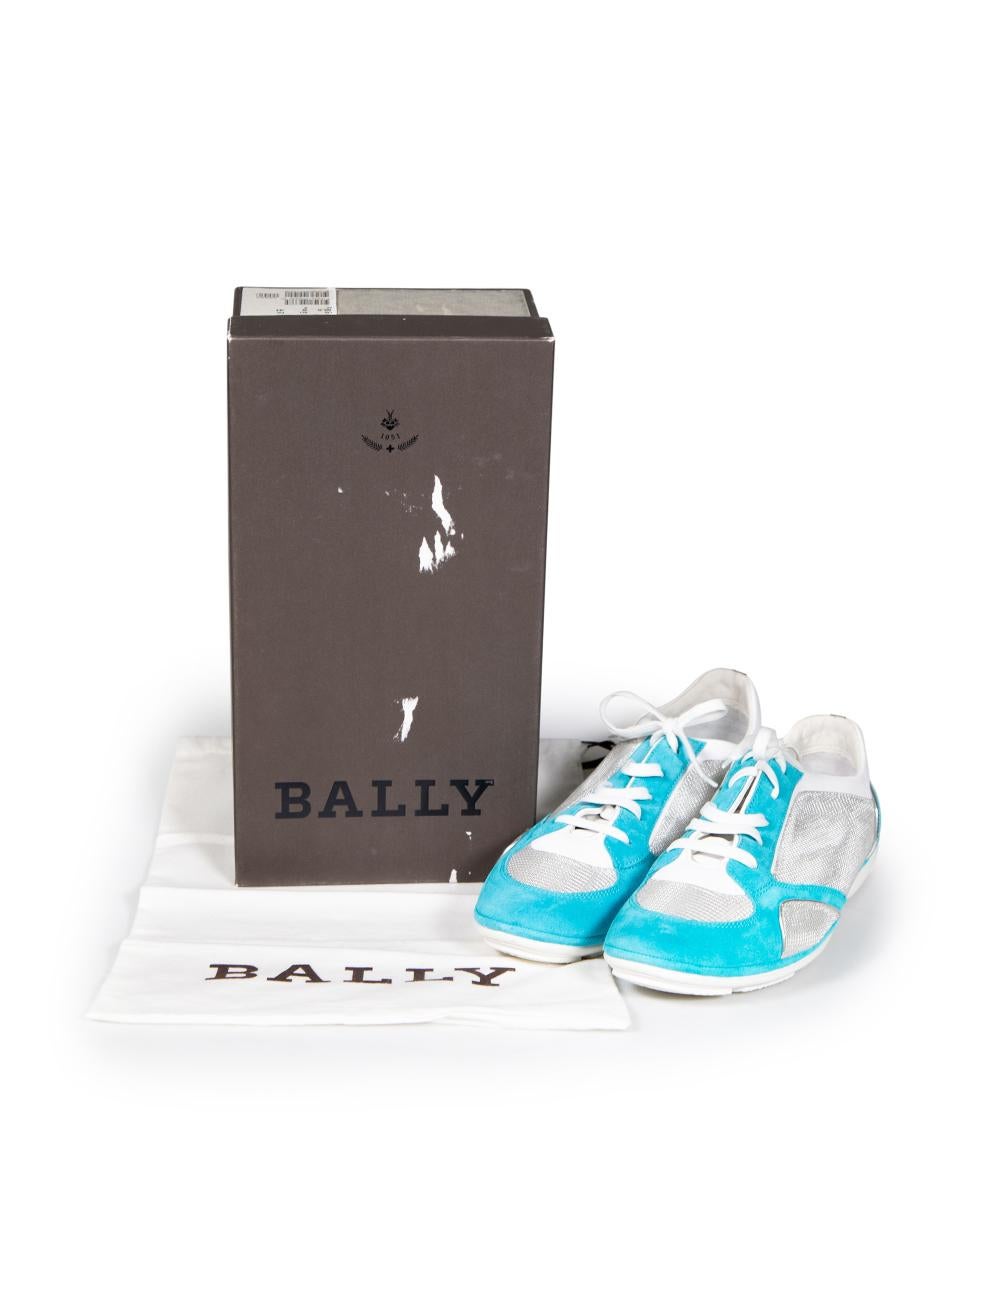 Bally Blue Suede Panel Mesh Lace Up Trainers Size EU 41 For Sale 2